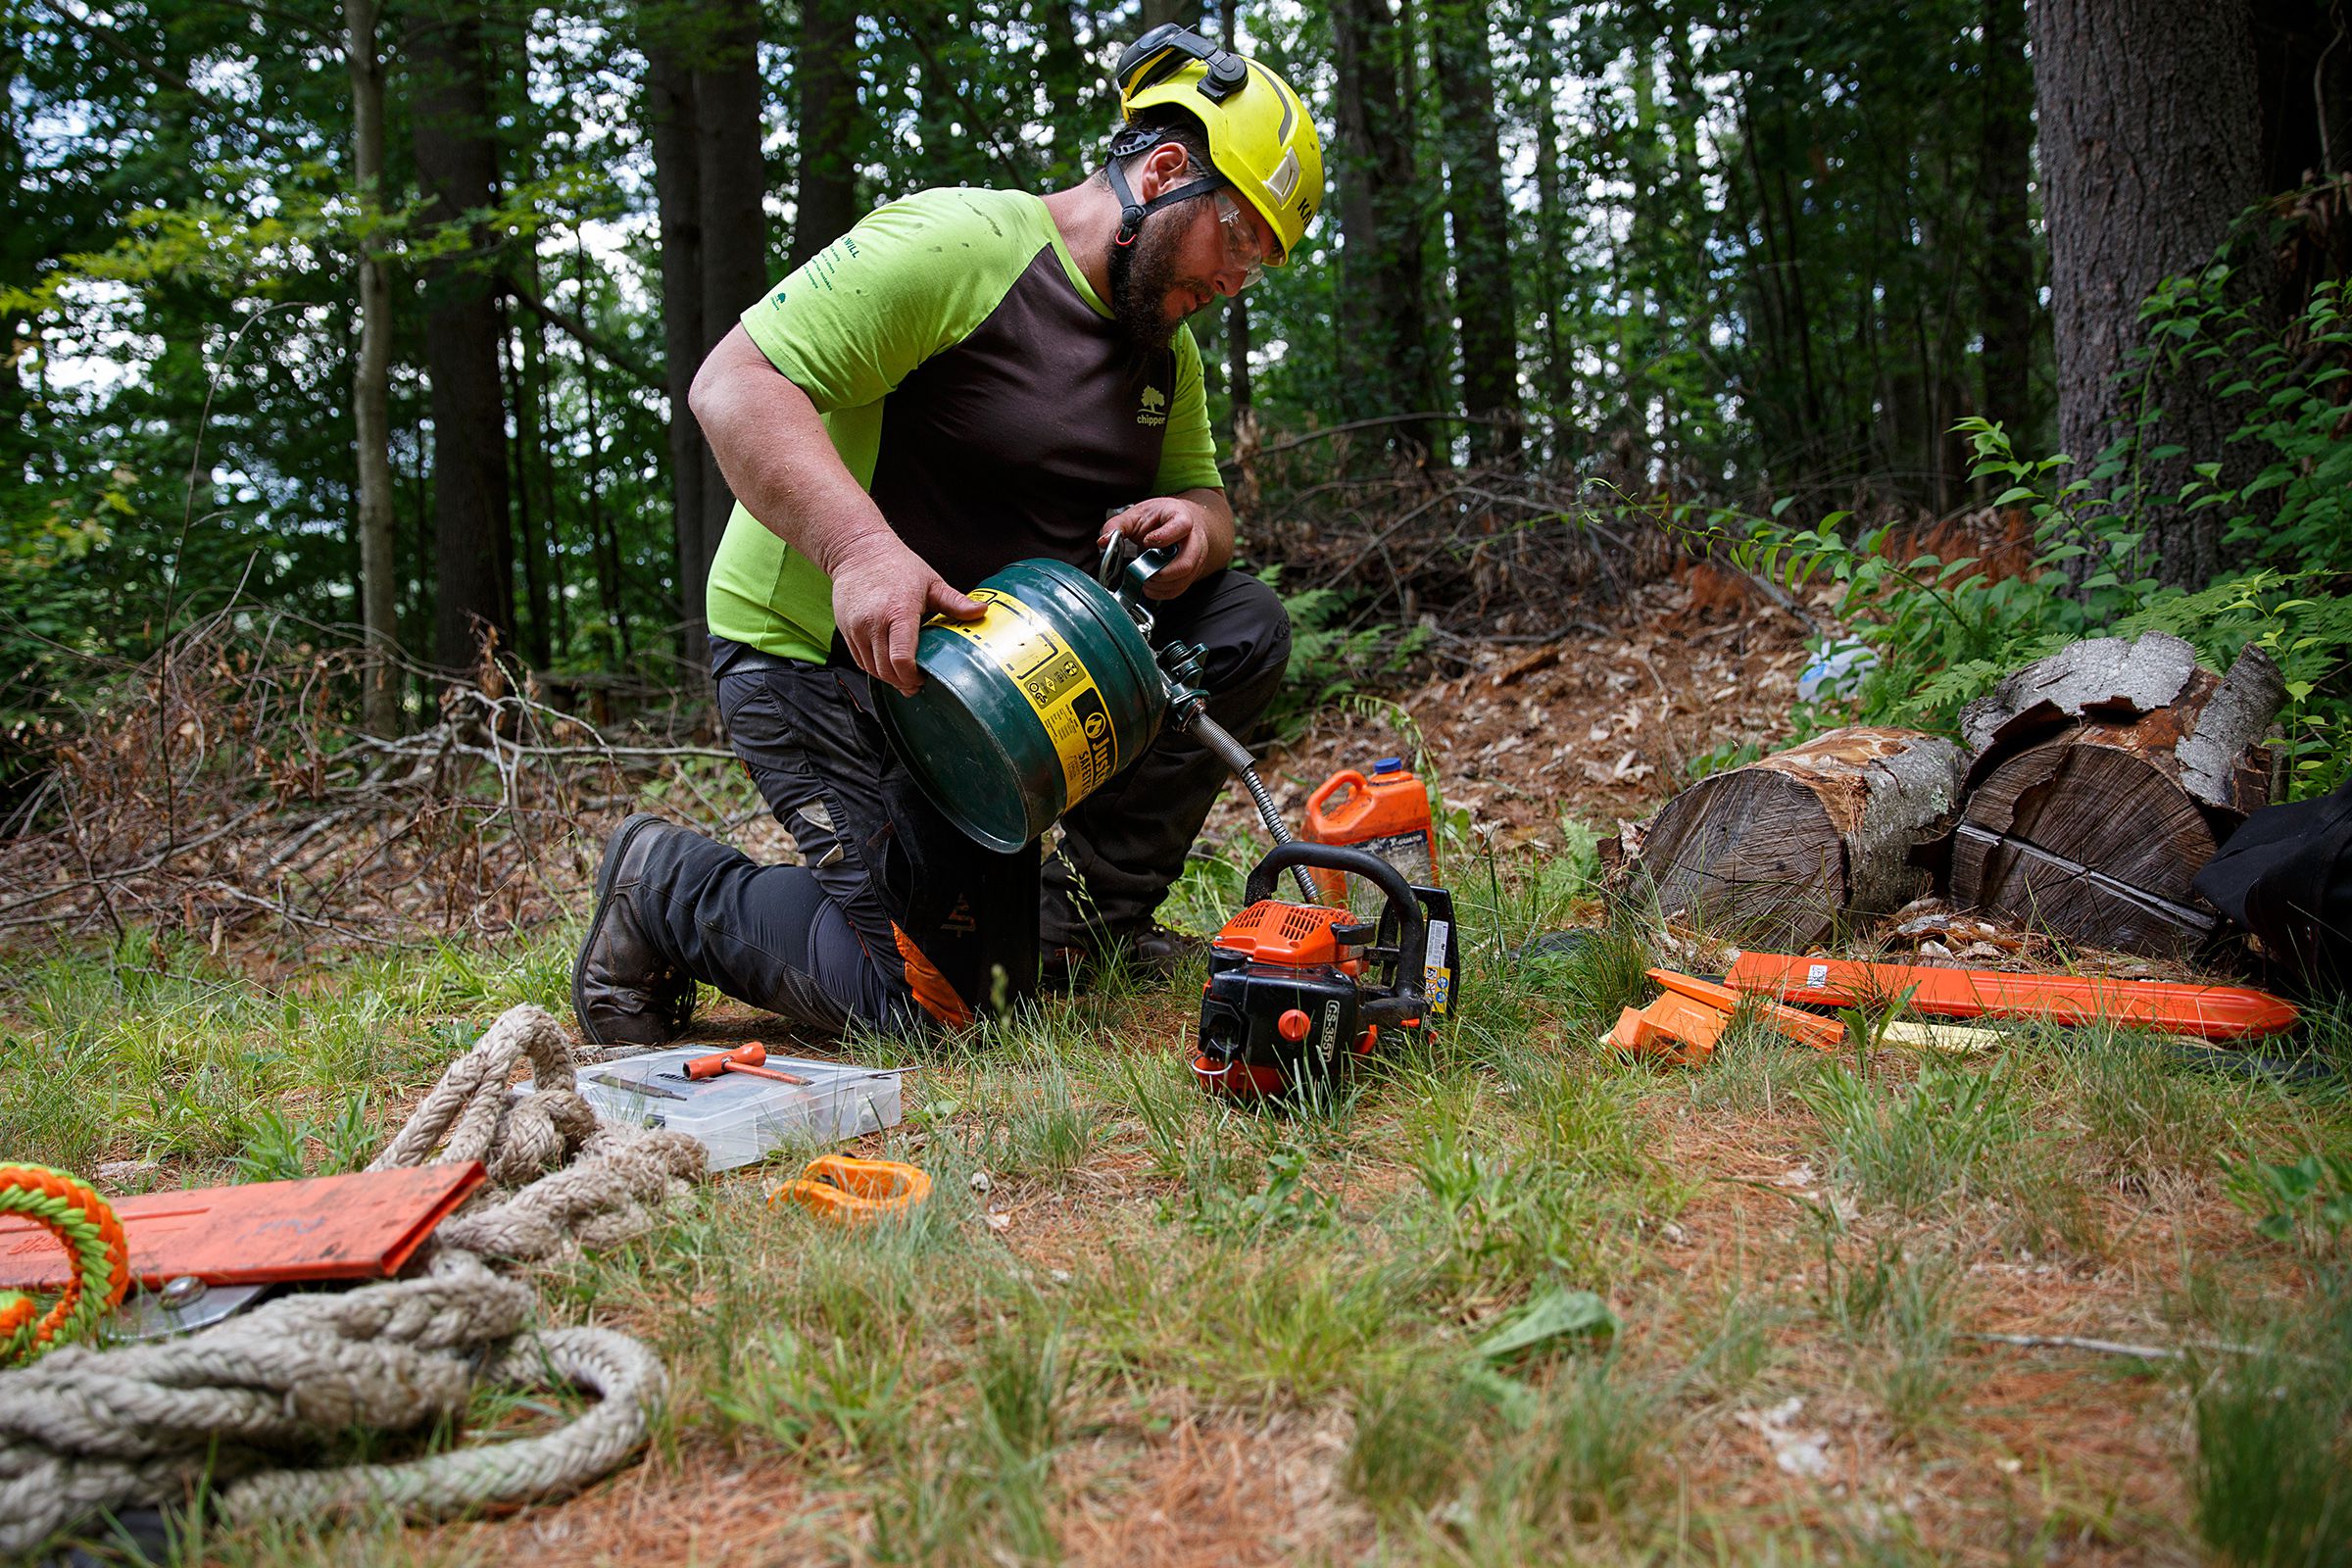 Matt Gray, of Goshen, N.H., refills a chainsaw with gas during a Chippers, Inc. tree removal job at a home in Hanover, N.H., on Wednesday, June 30, 2021. (Valley News / Report For America - Alex Driehaus) Copyright Valley News. May not be reprinted or used online without permission. Send requests to permission@vnews.com.